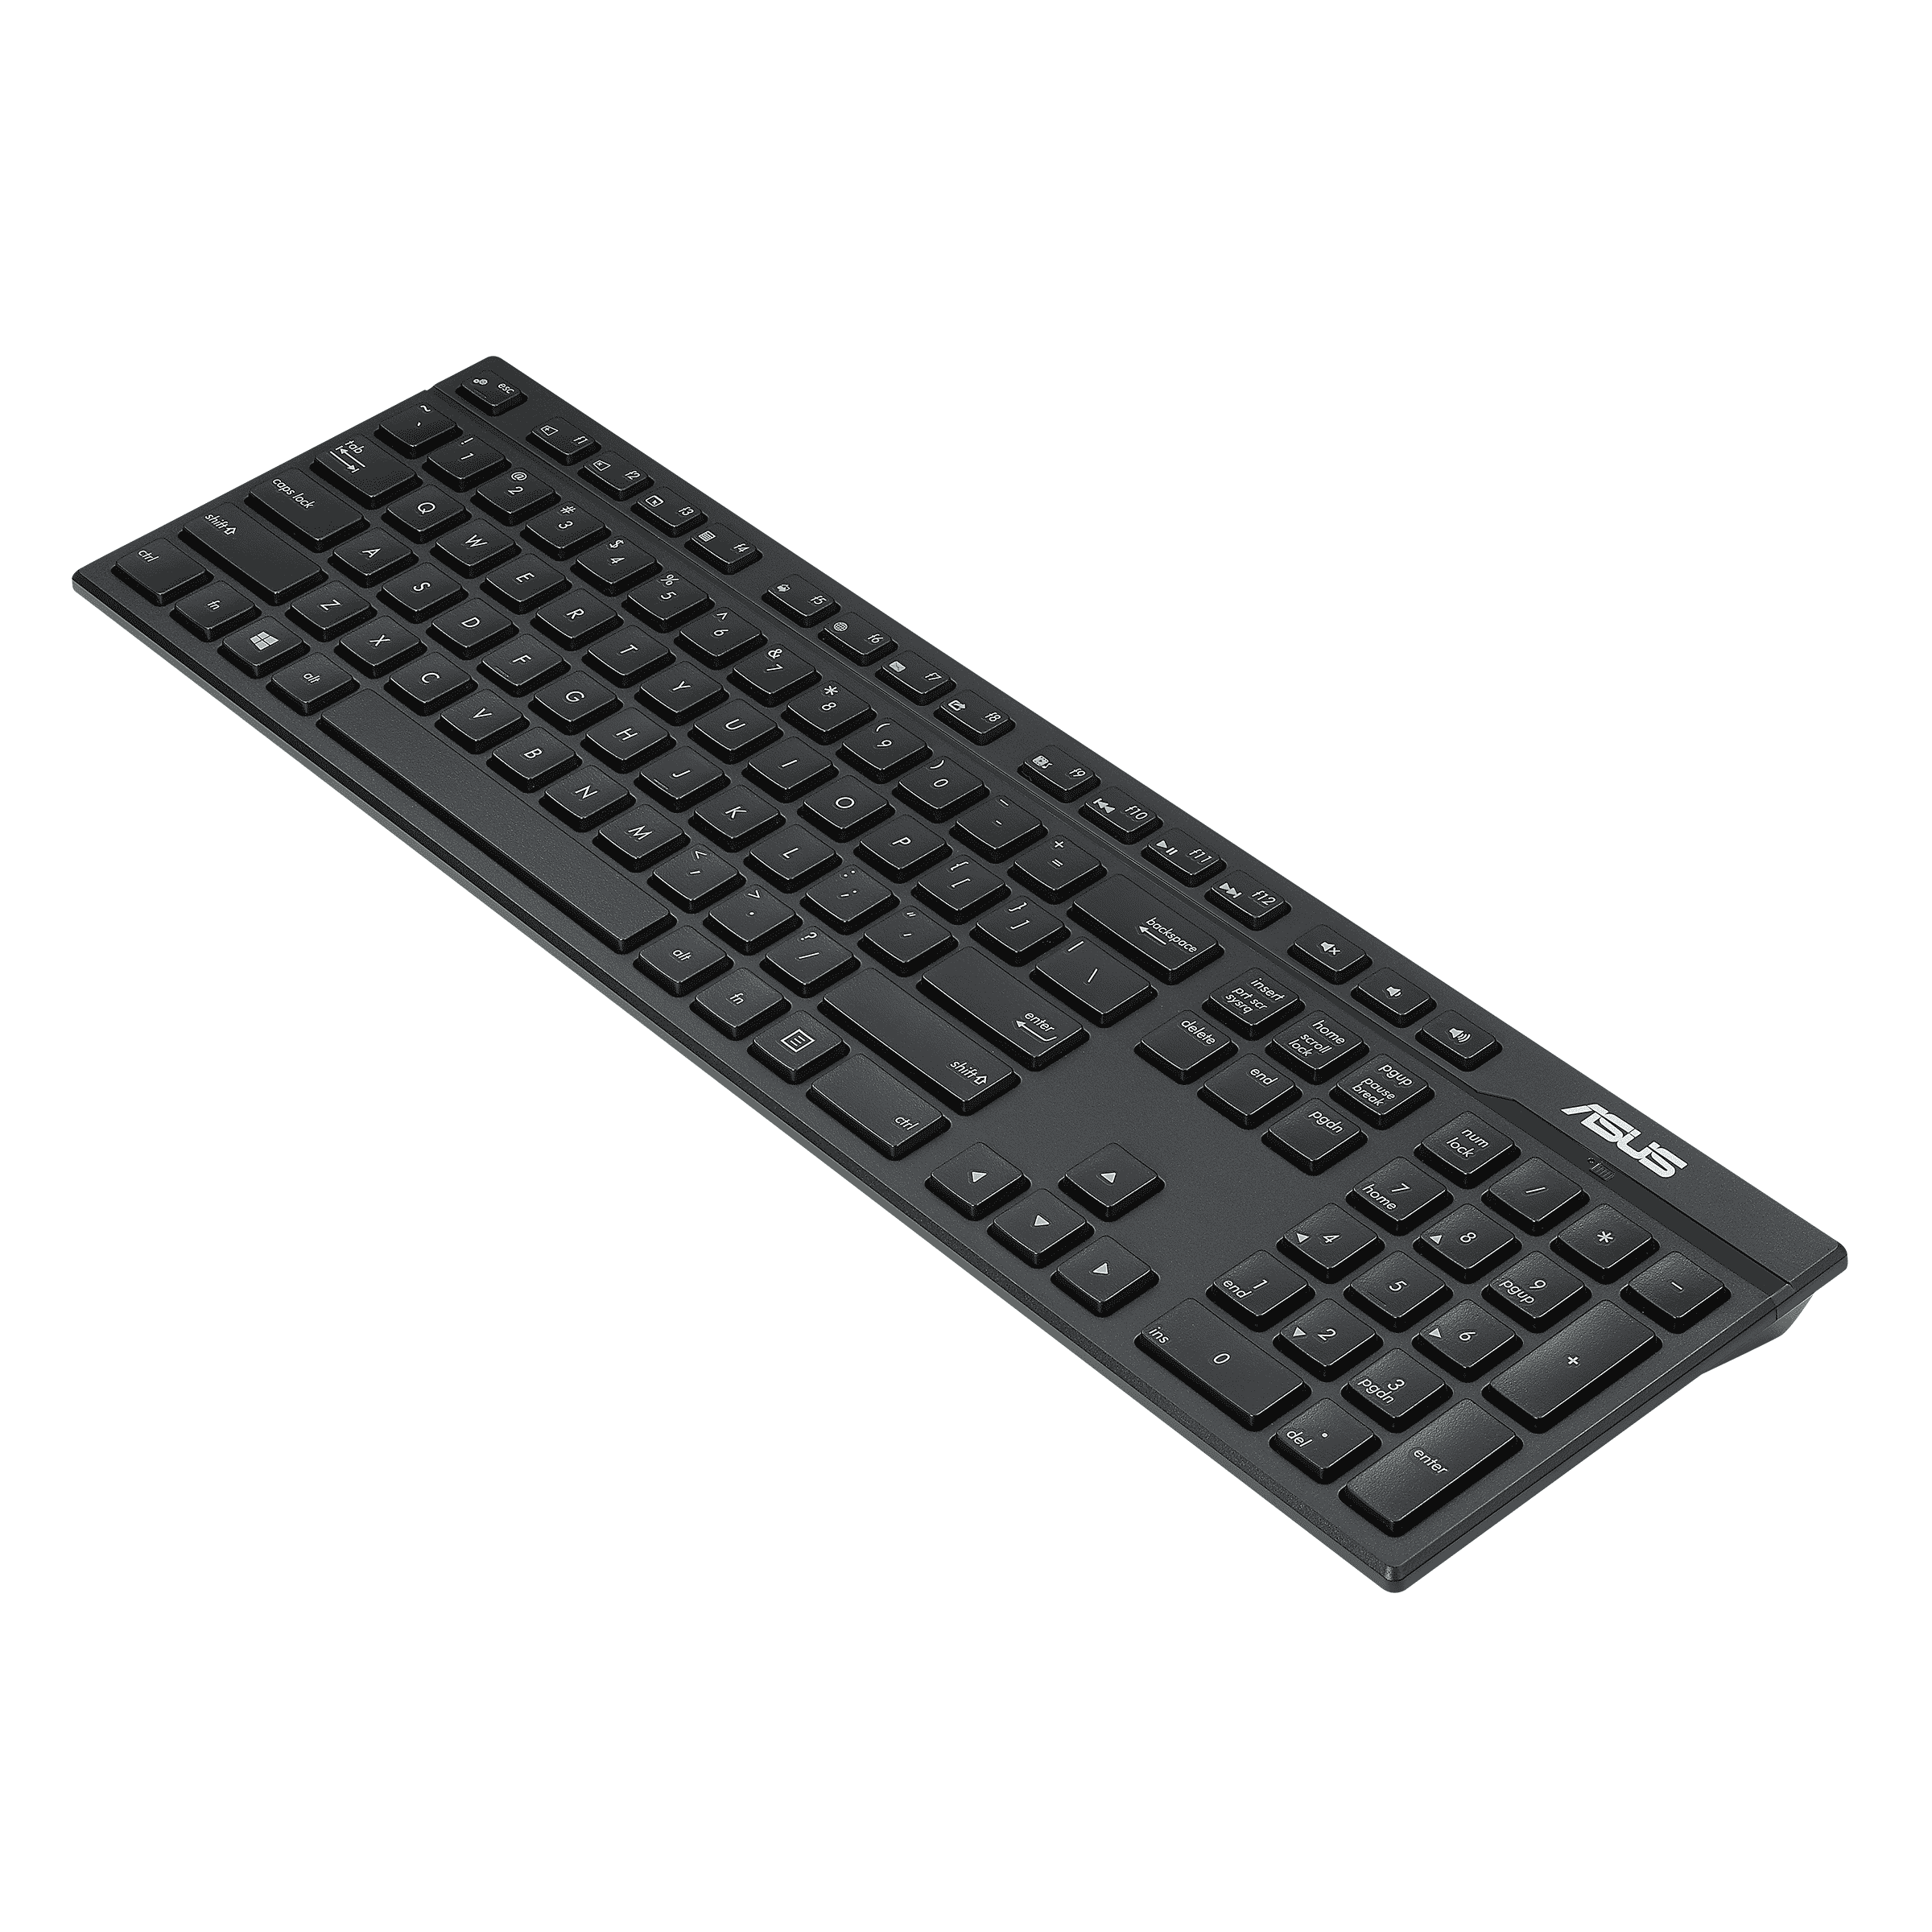 Asus W2500 Wireless Keyboard And Mouse Set Keyboards Asus Global